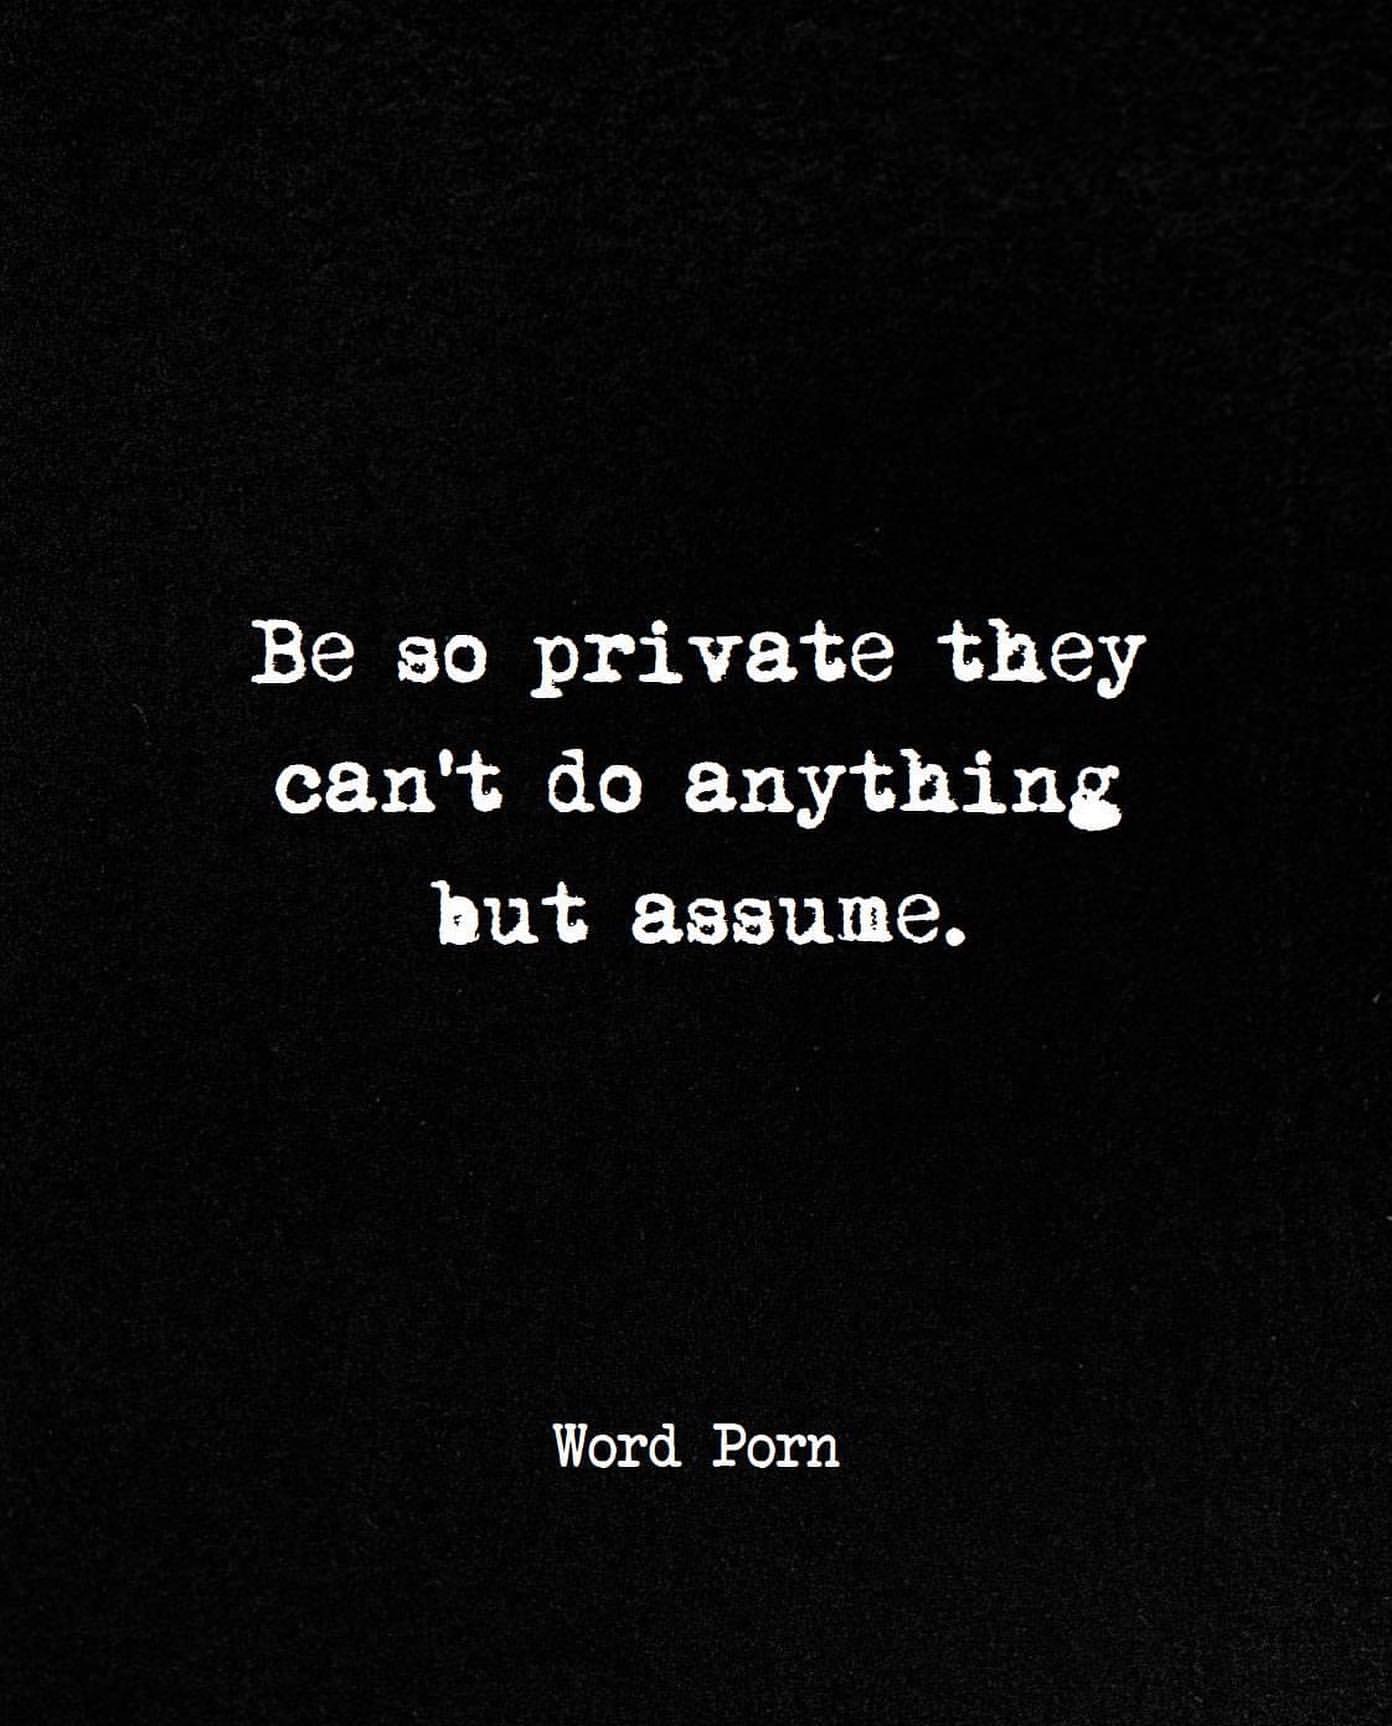 Be so private they can't do anything but assume.